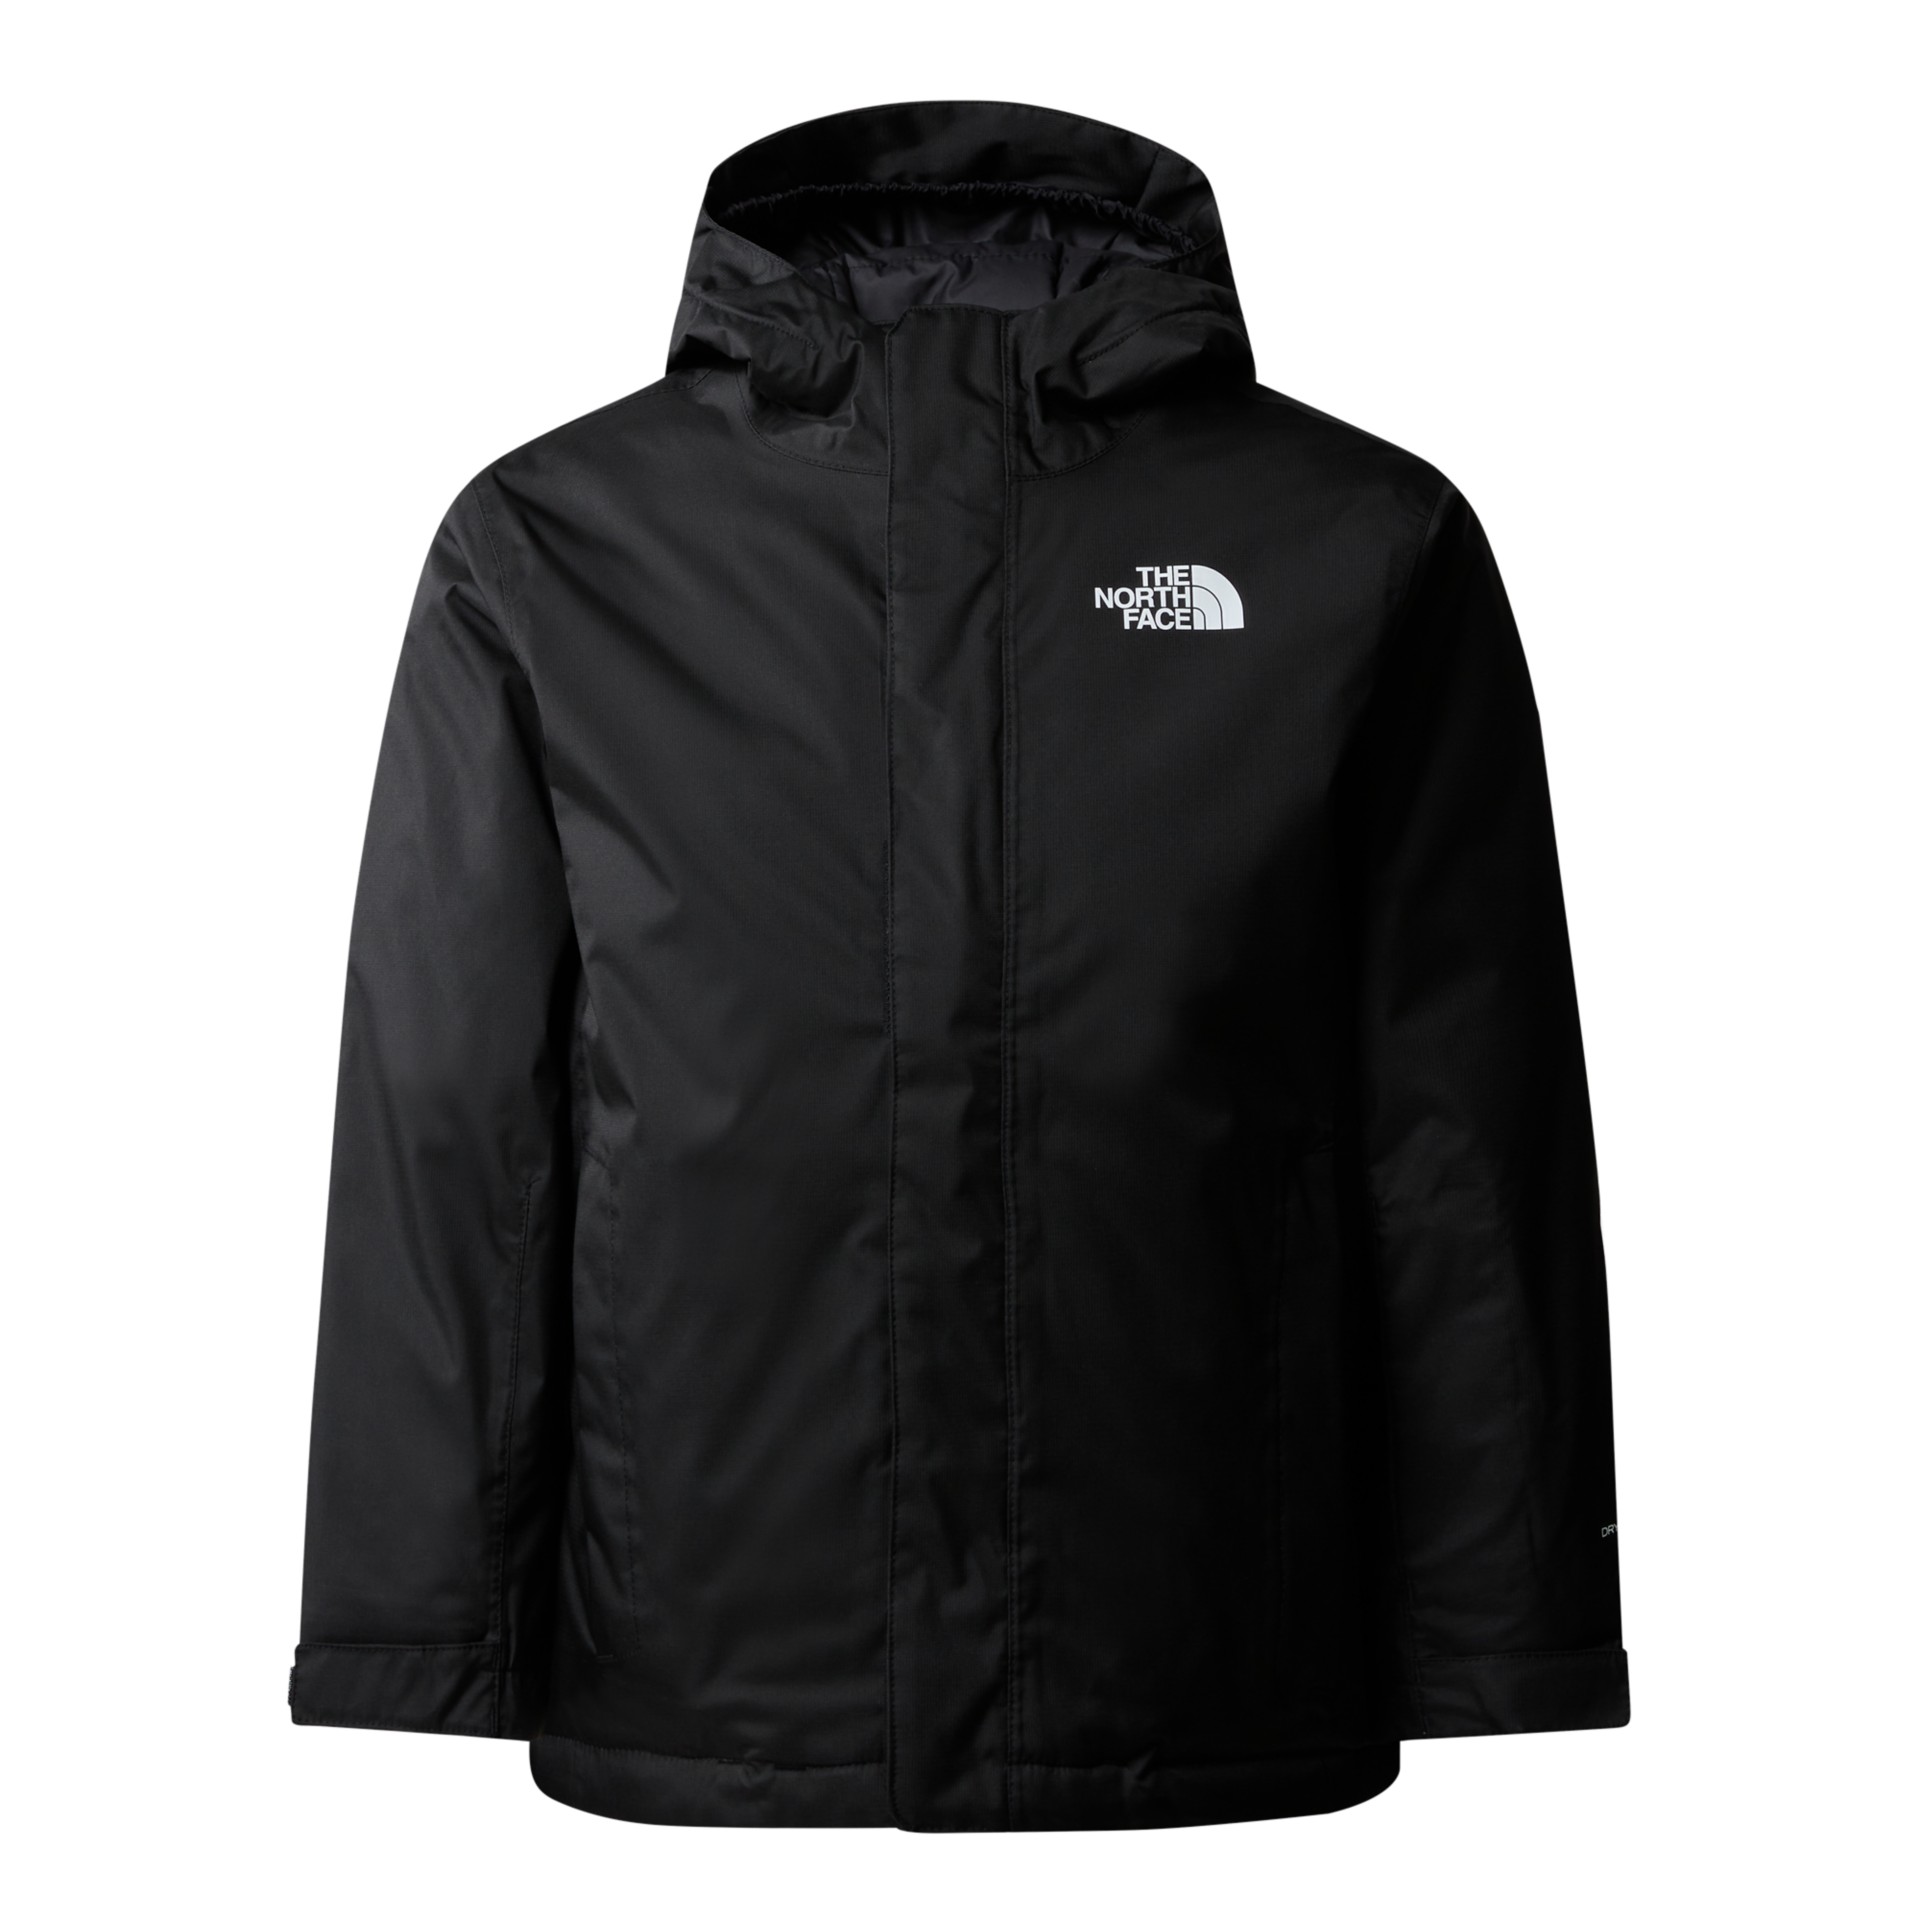 The North Face Kids Teen Snowquest Jacket